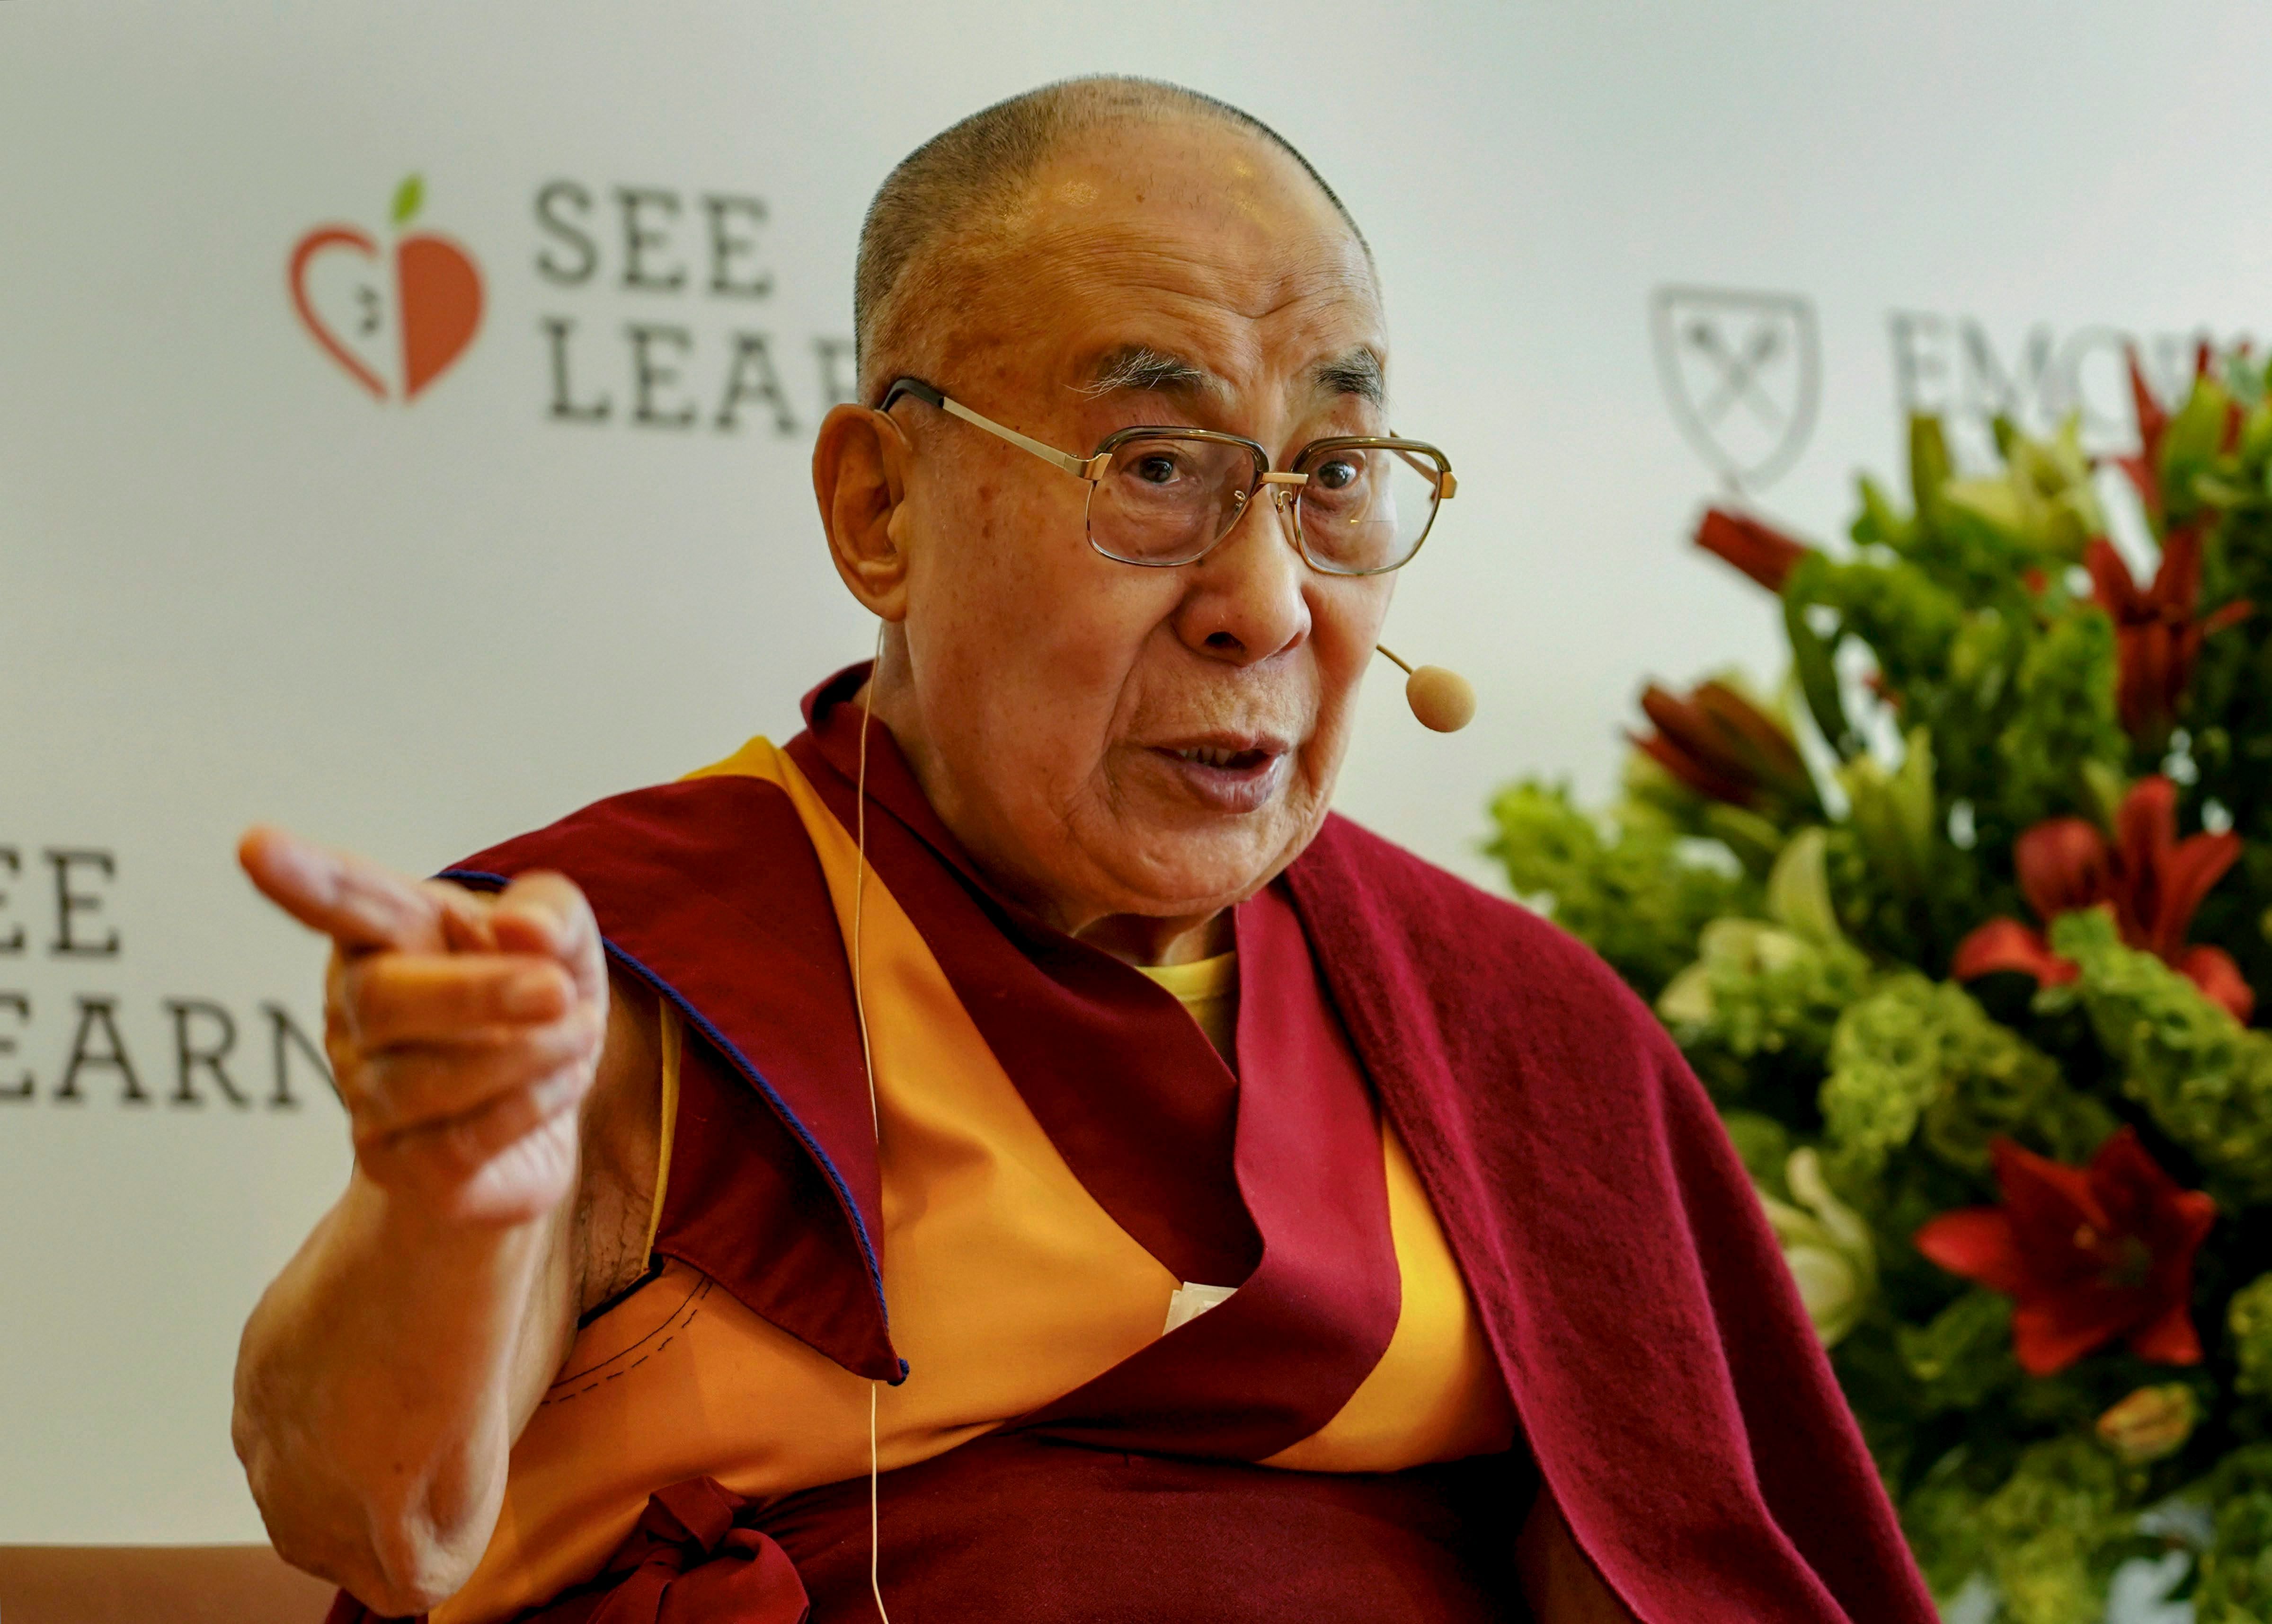 The Dalai Lama named the original Panchen Lama with the help of Tibetan lamas trained in reading portents and signs. (Credit: PTI Photo)